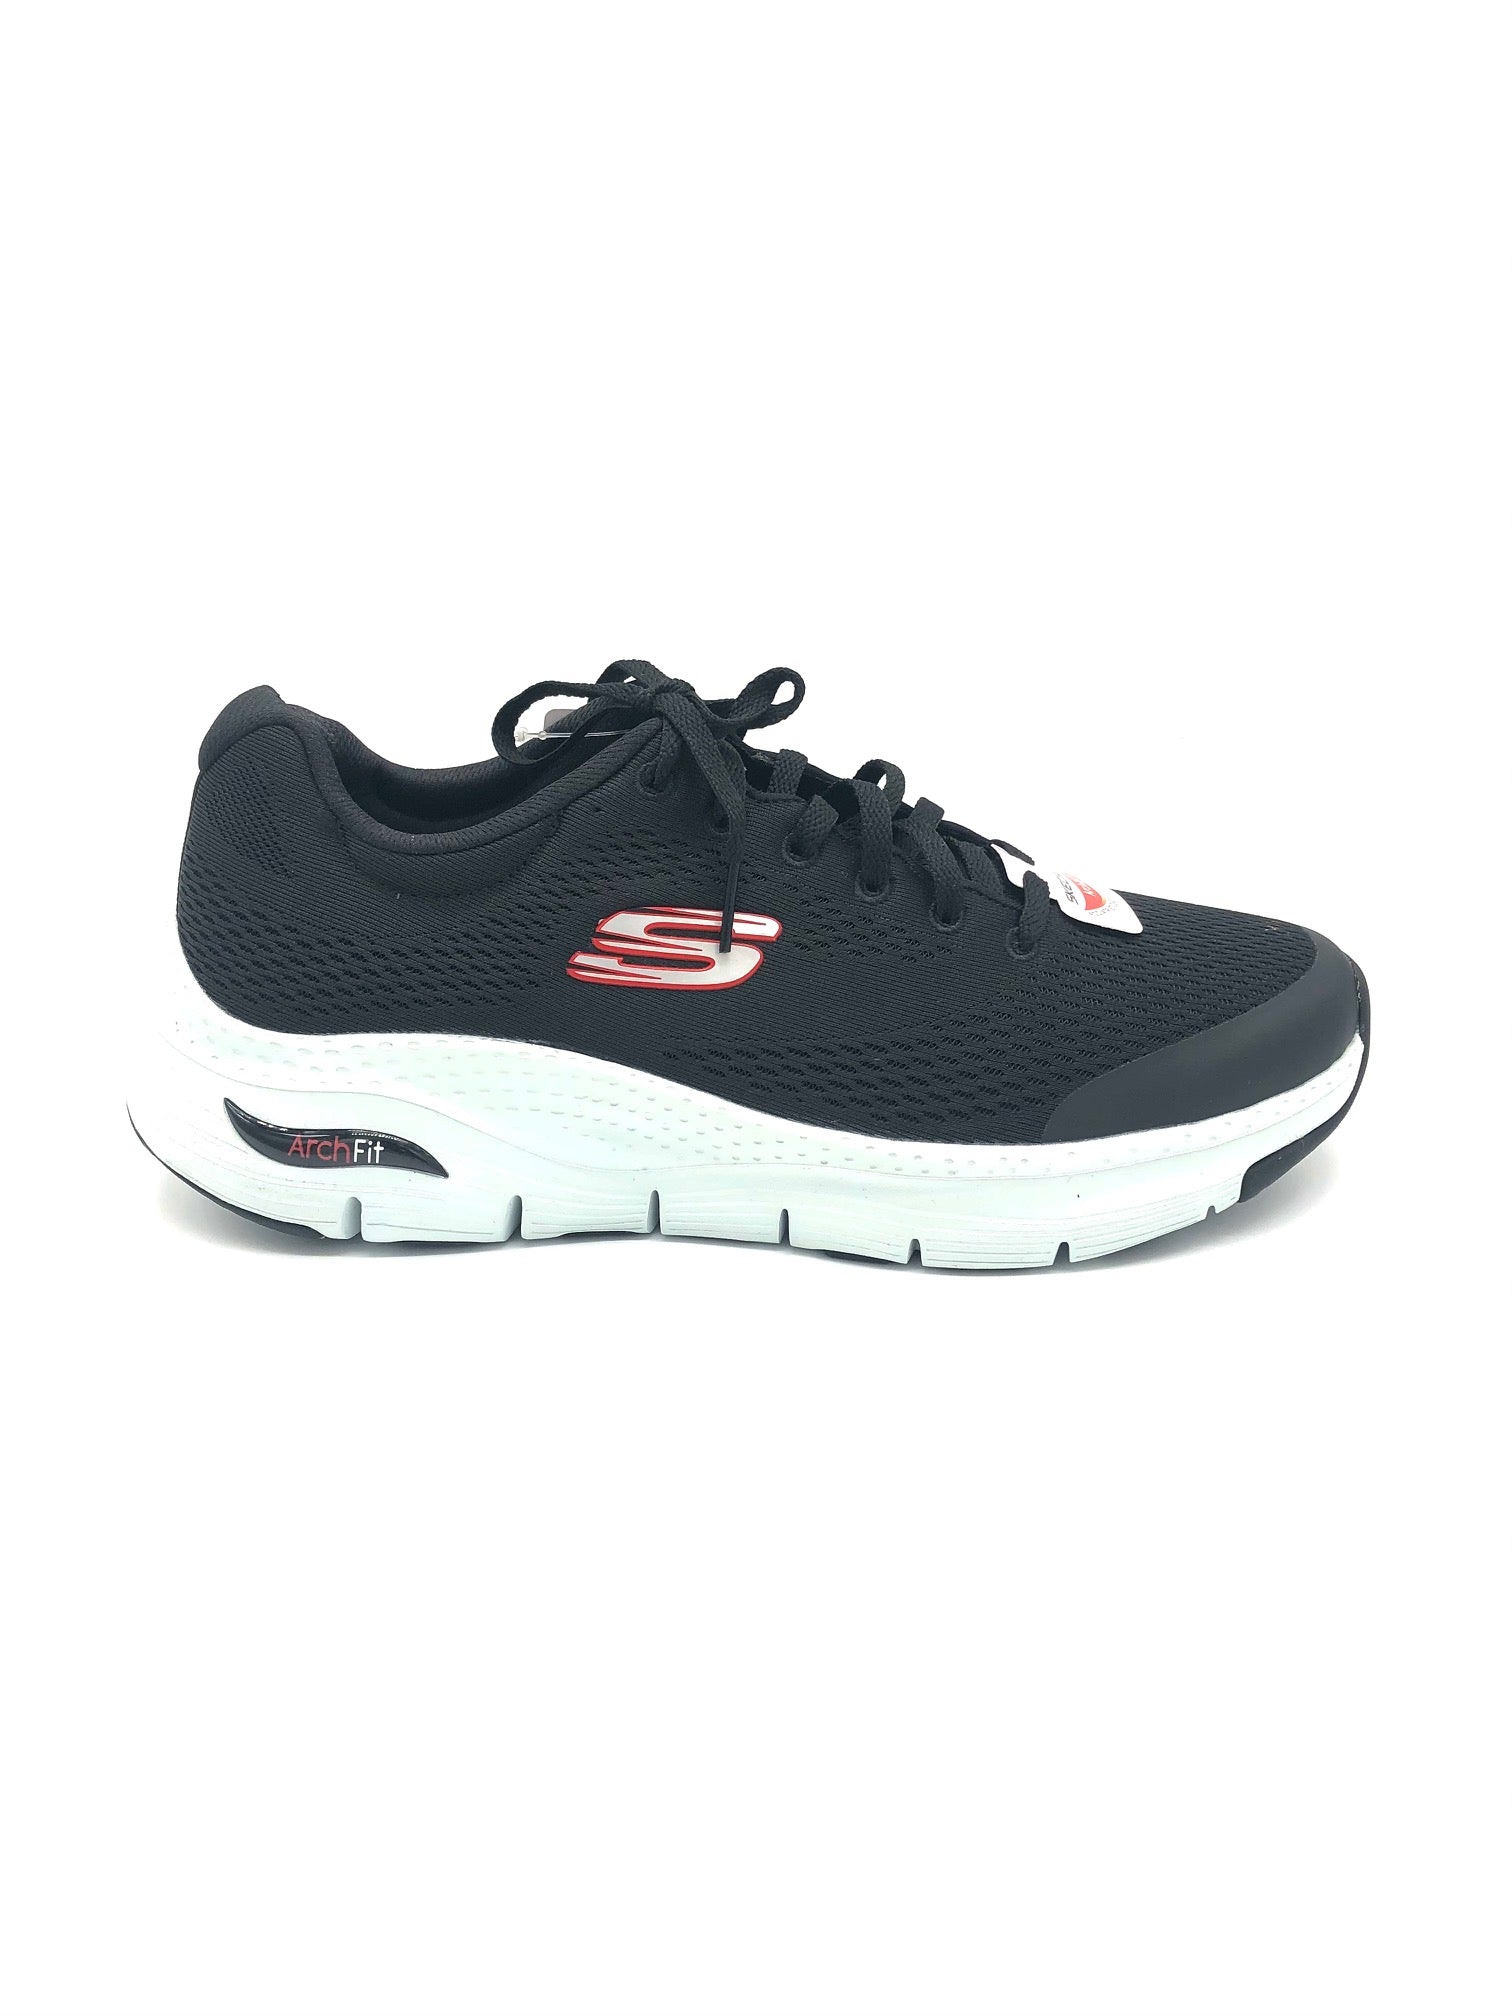 Skechers' Arch Fit - Black / Red (Wide) – Outfitter